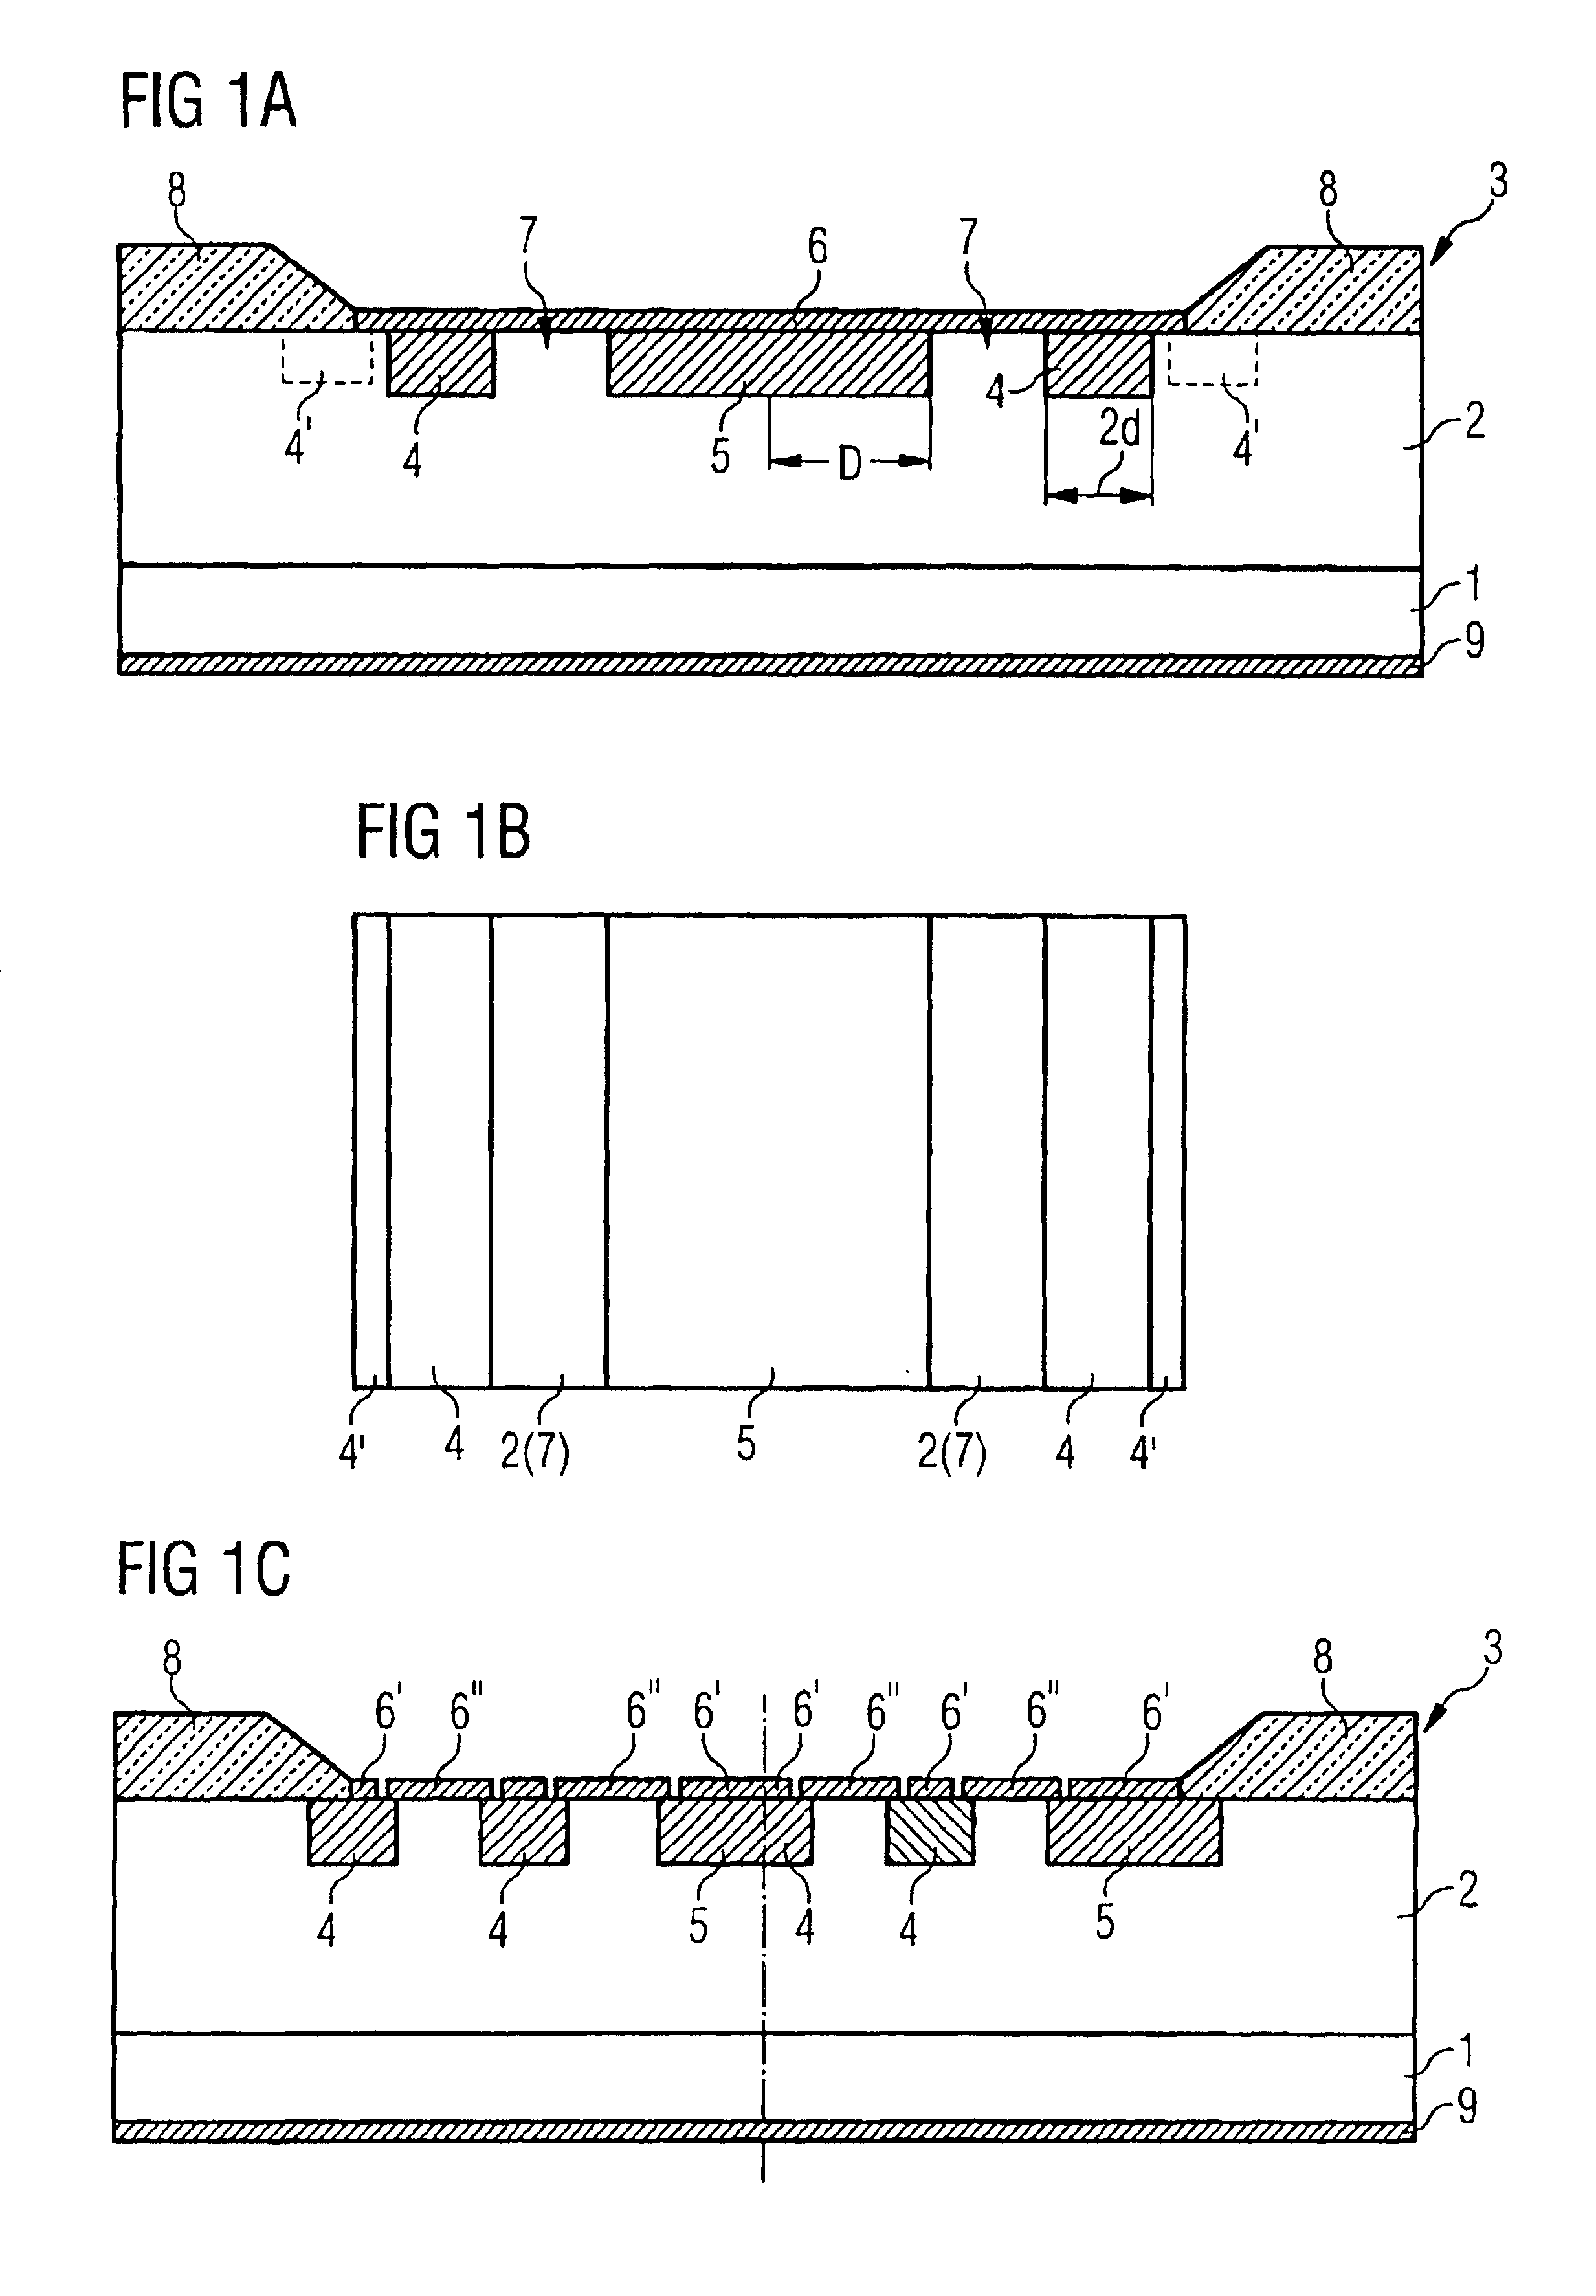 Schottky diode having overcurrent protection and low reverse current